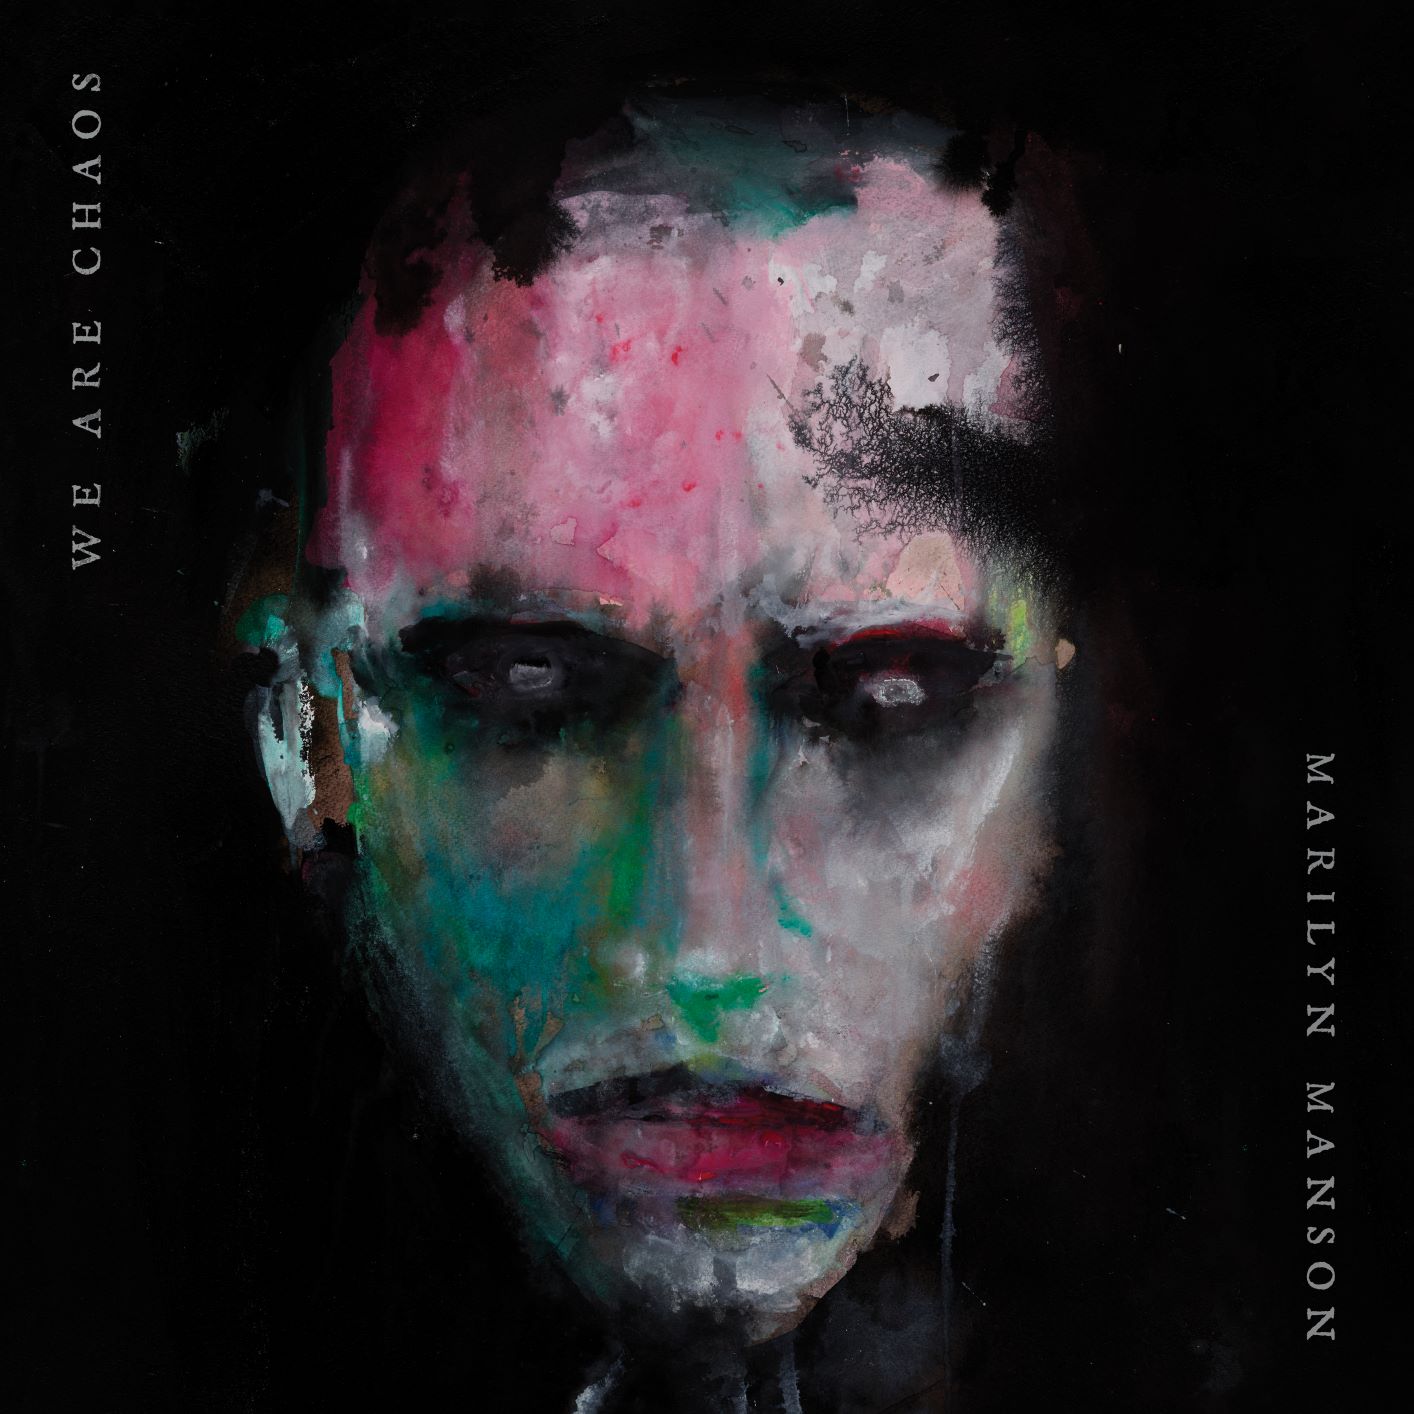 Marilyn Manson - We Are Chaos [LP] (Indie Exclusive w/ Postcards)